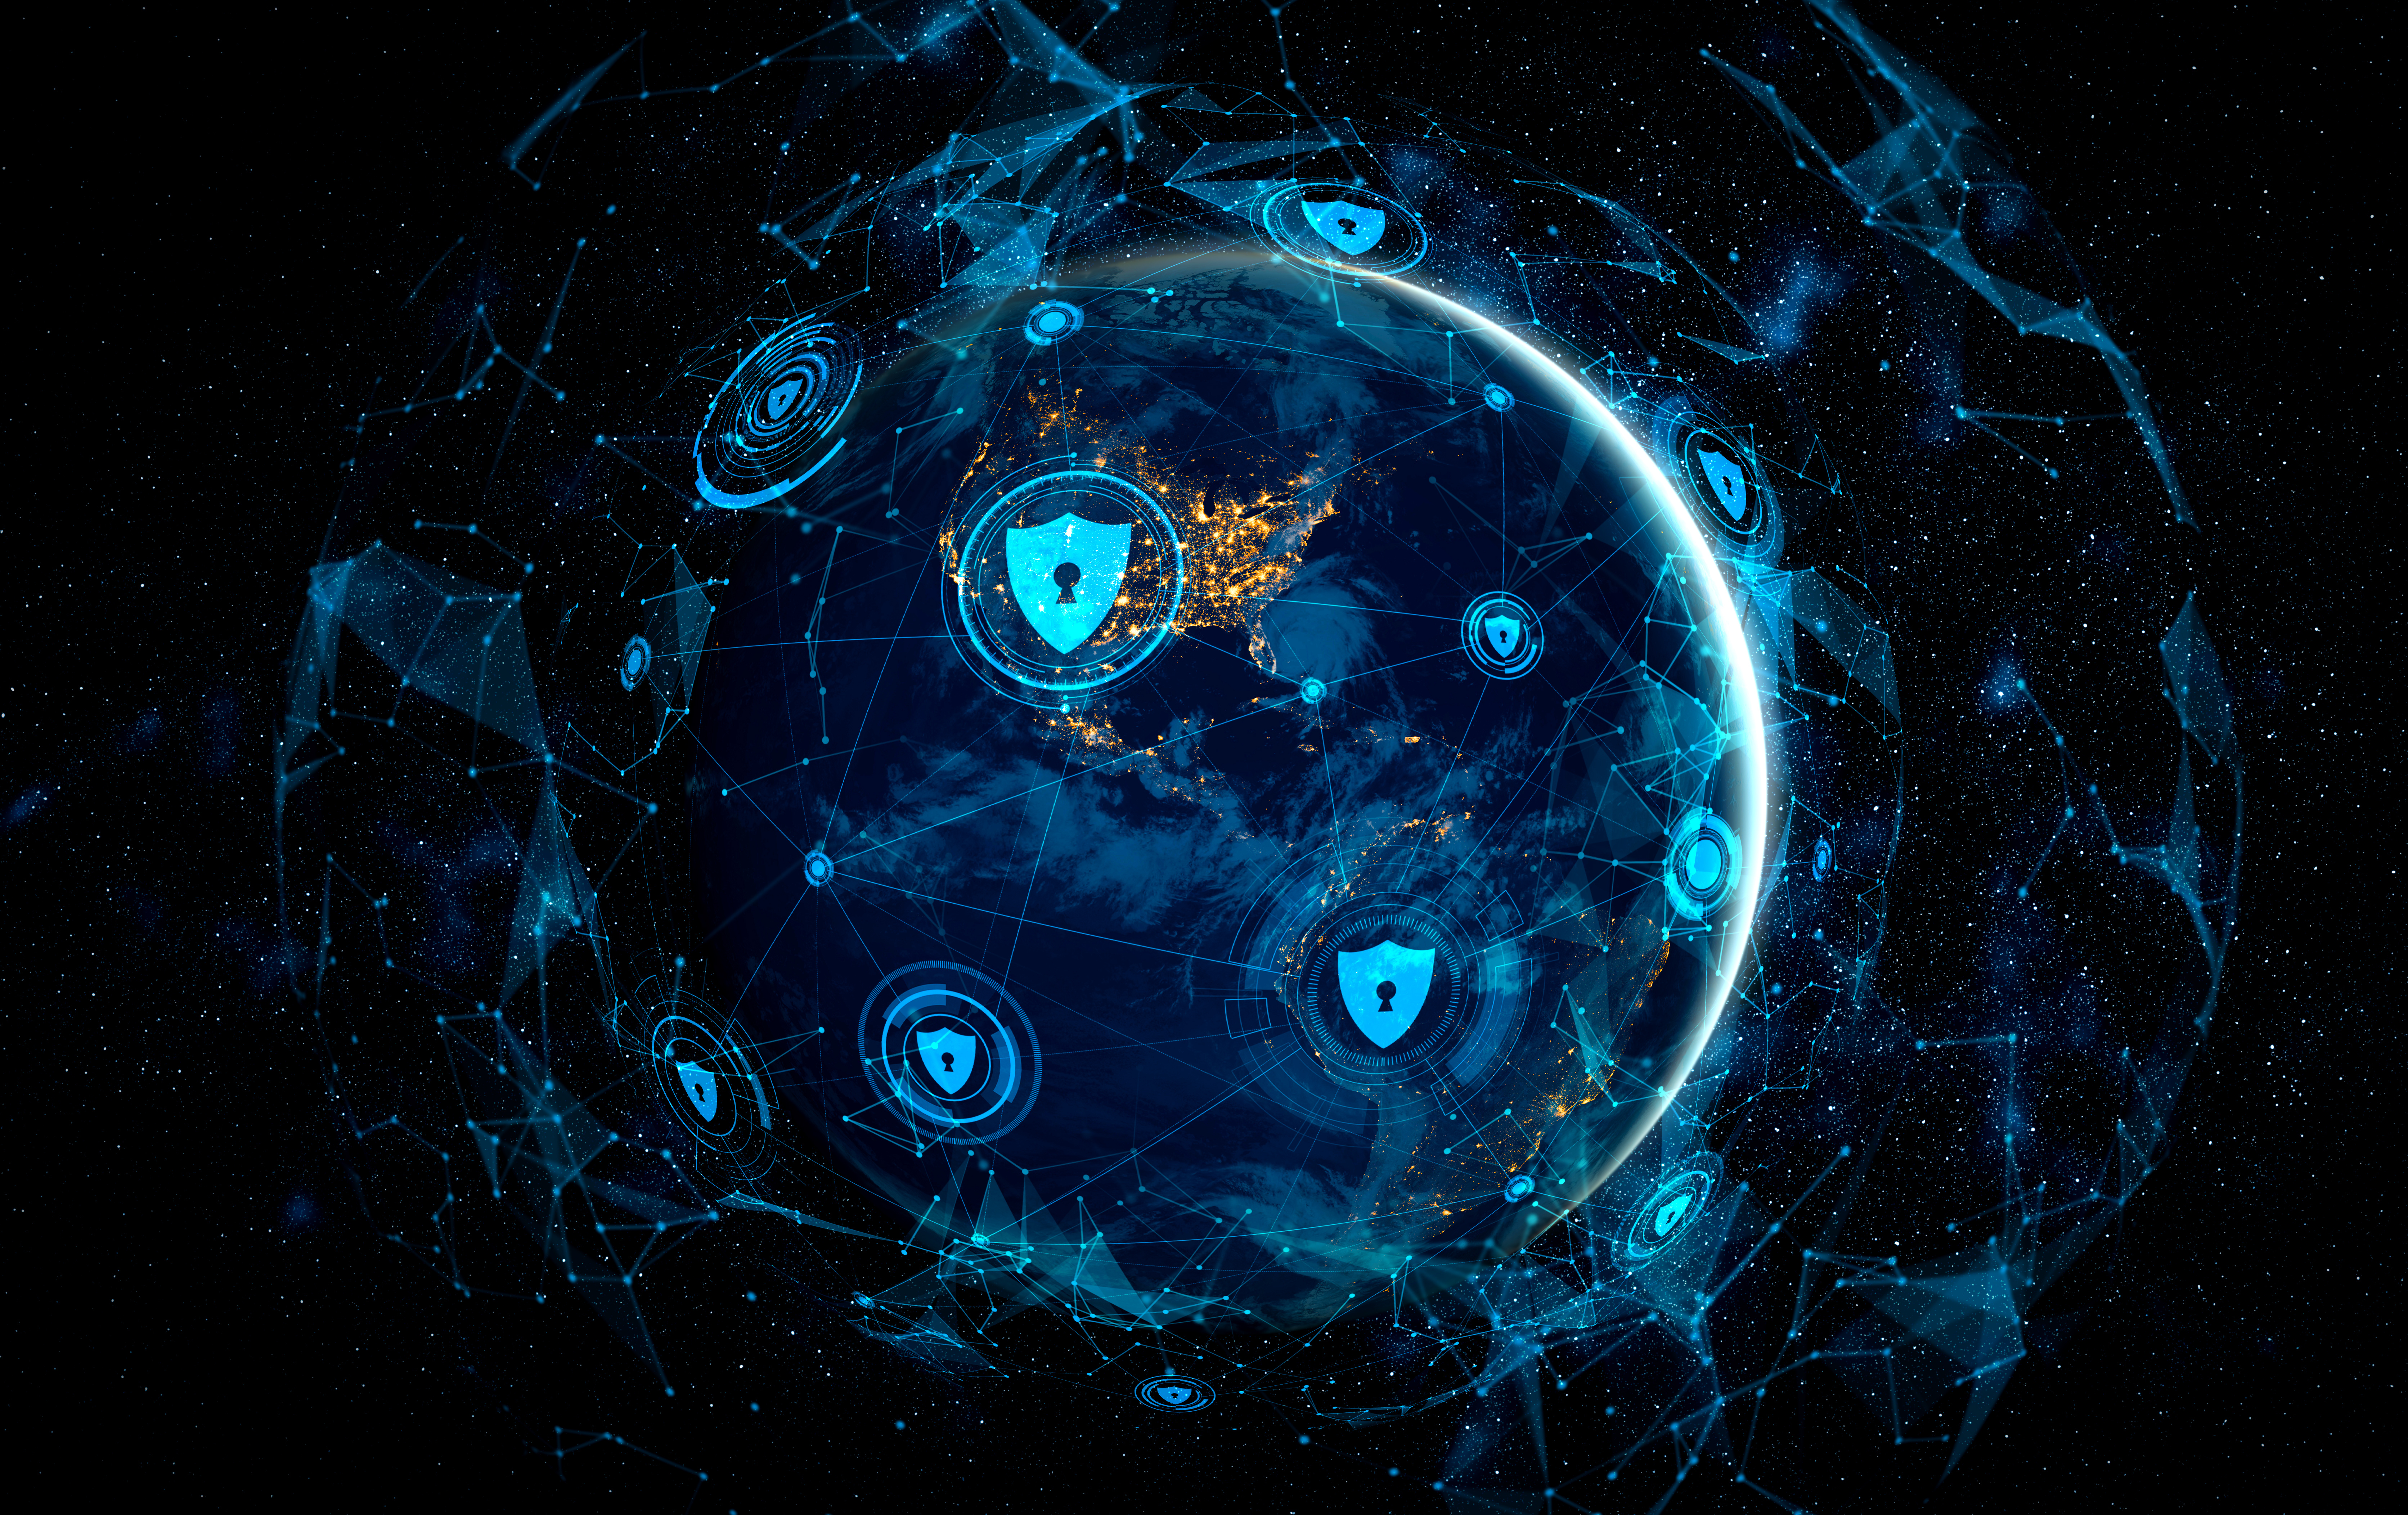 The Earth surrounded by secure connectivity